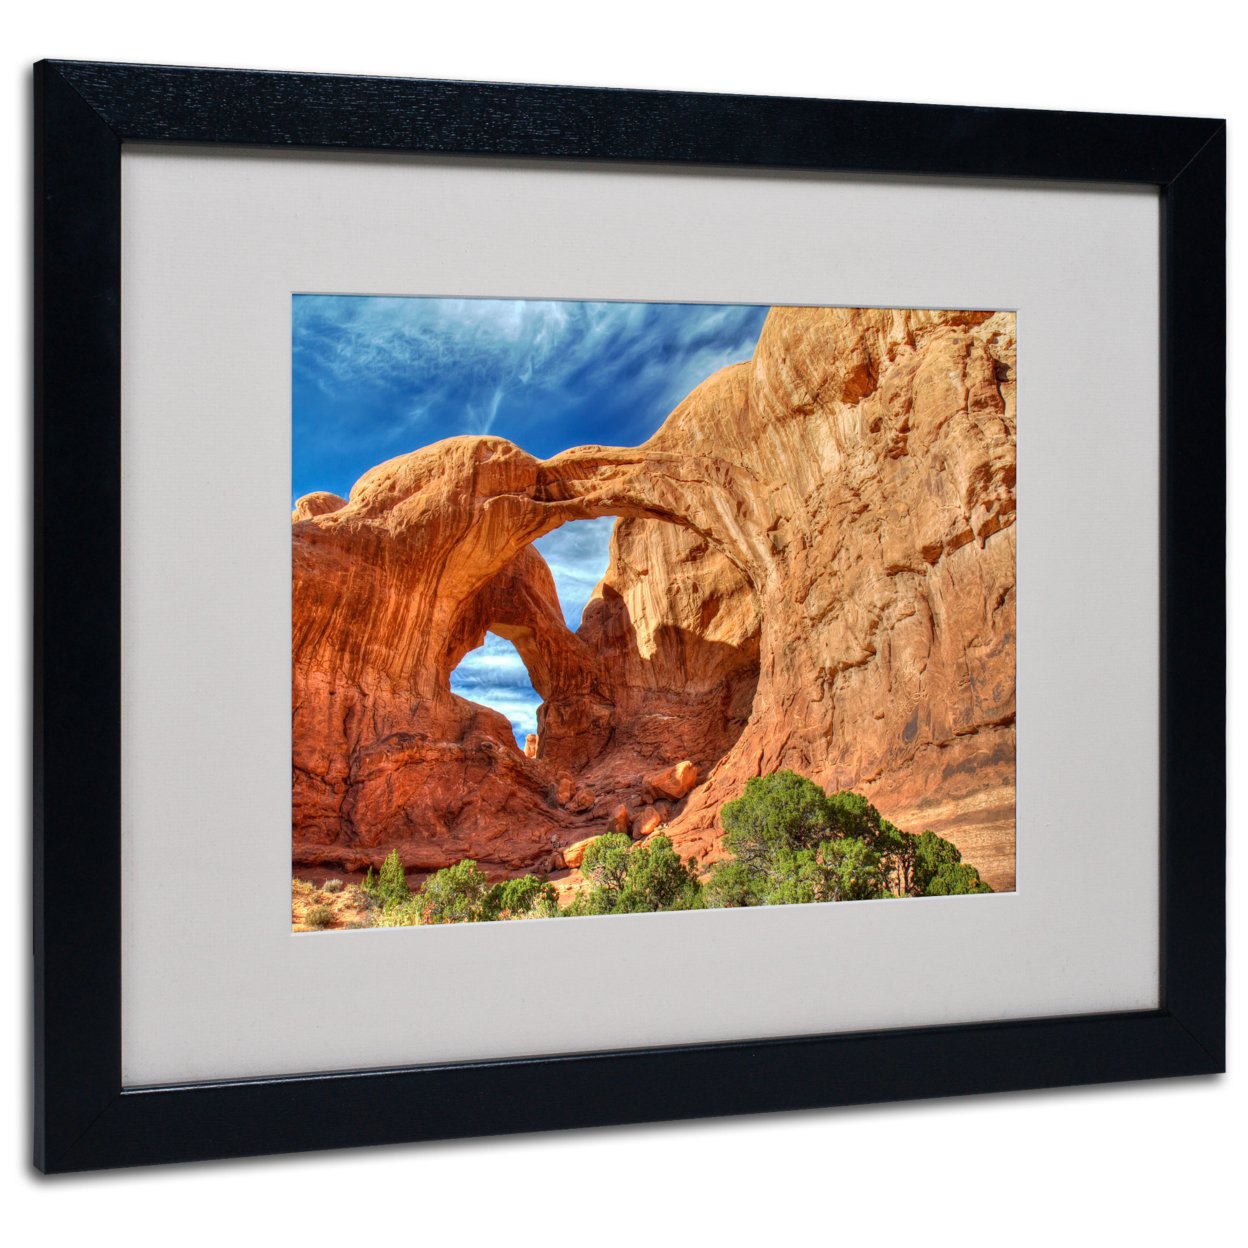 Pierre Leclerc 'Double Arch' Black Wooden Framed Art 18 X 22 Inches